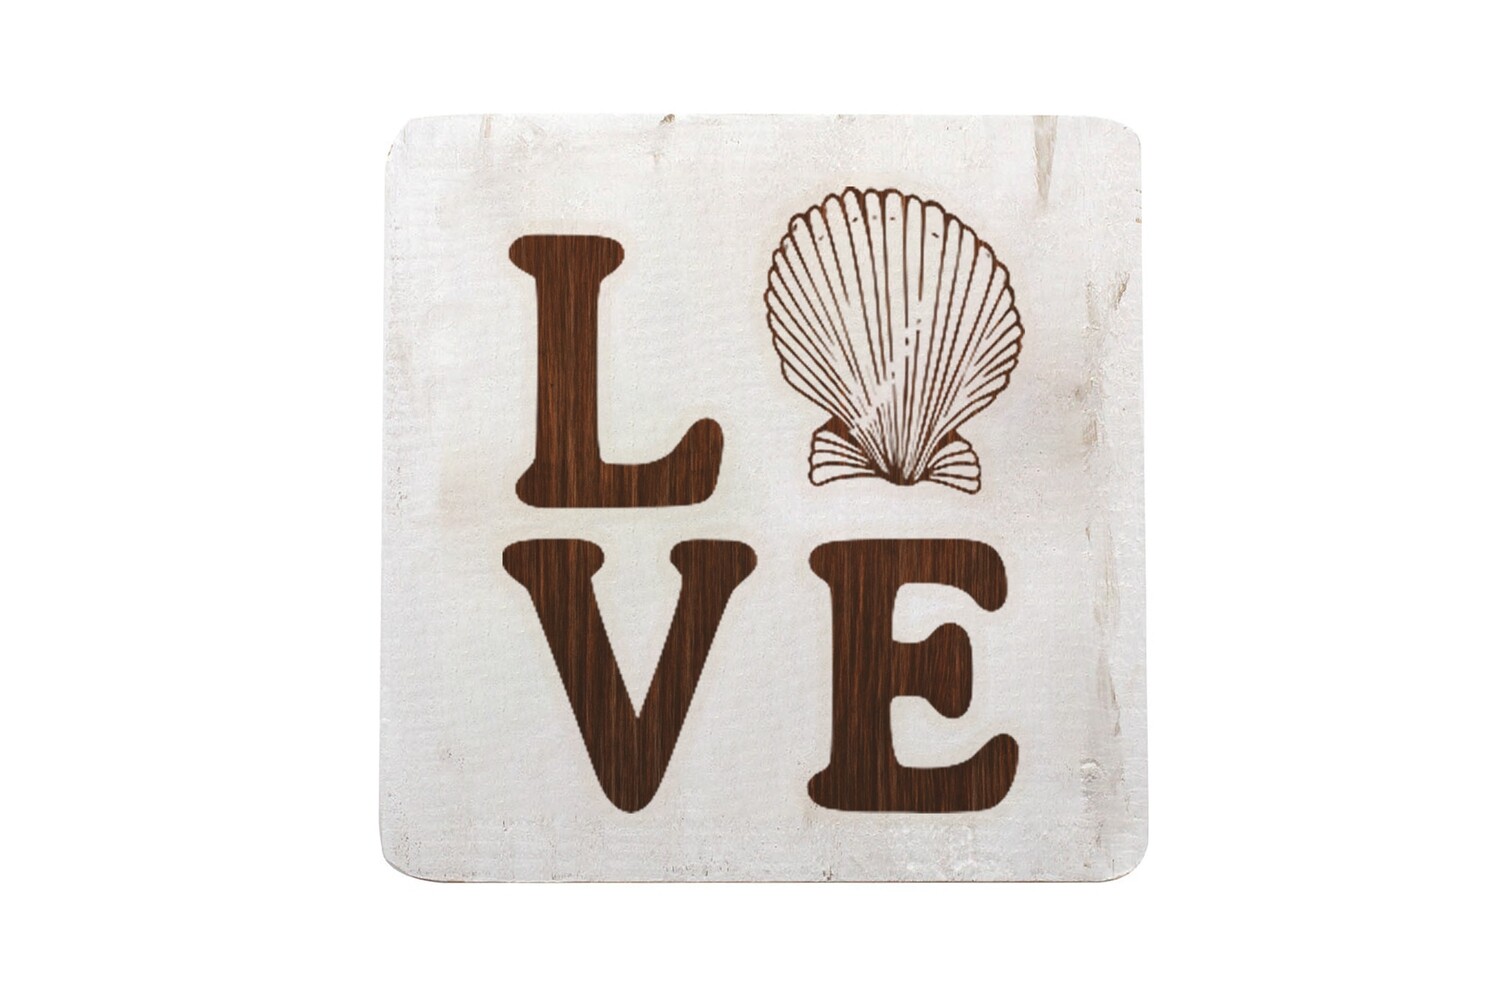 Love with Seashell Hand-Painted Wood Coaster Set